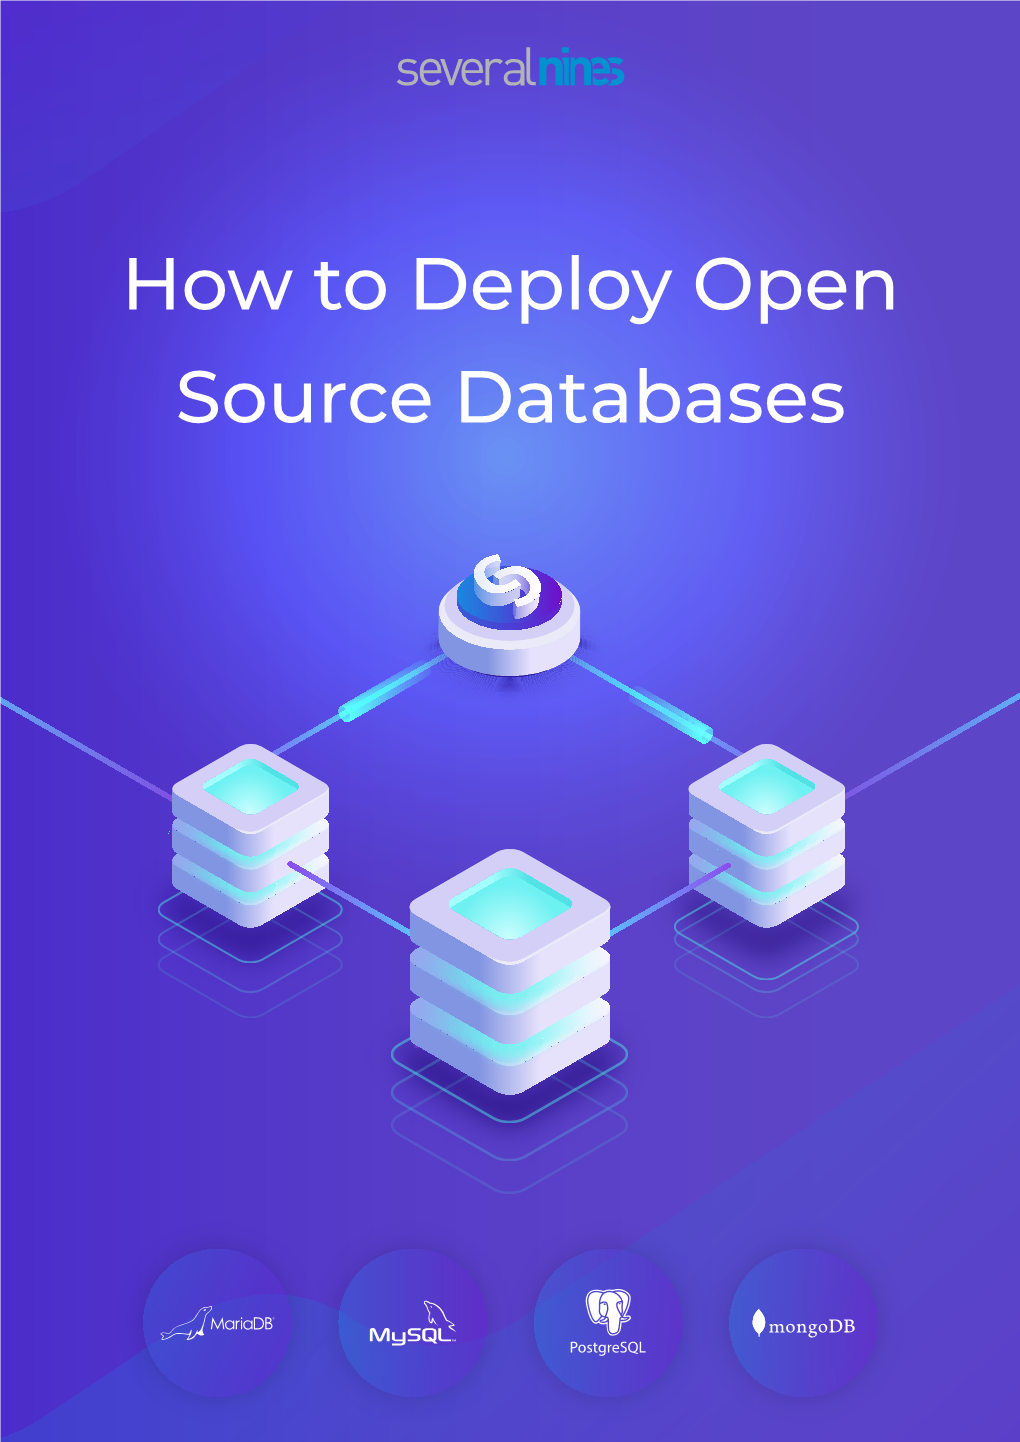 How to Deploy Open Source Databases